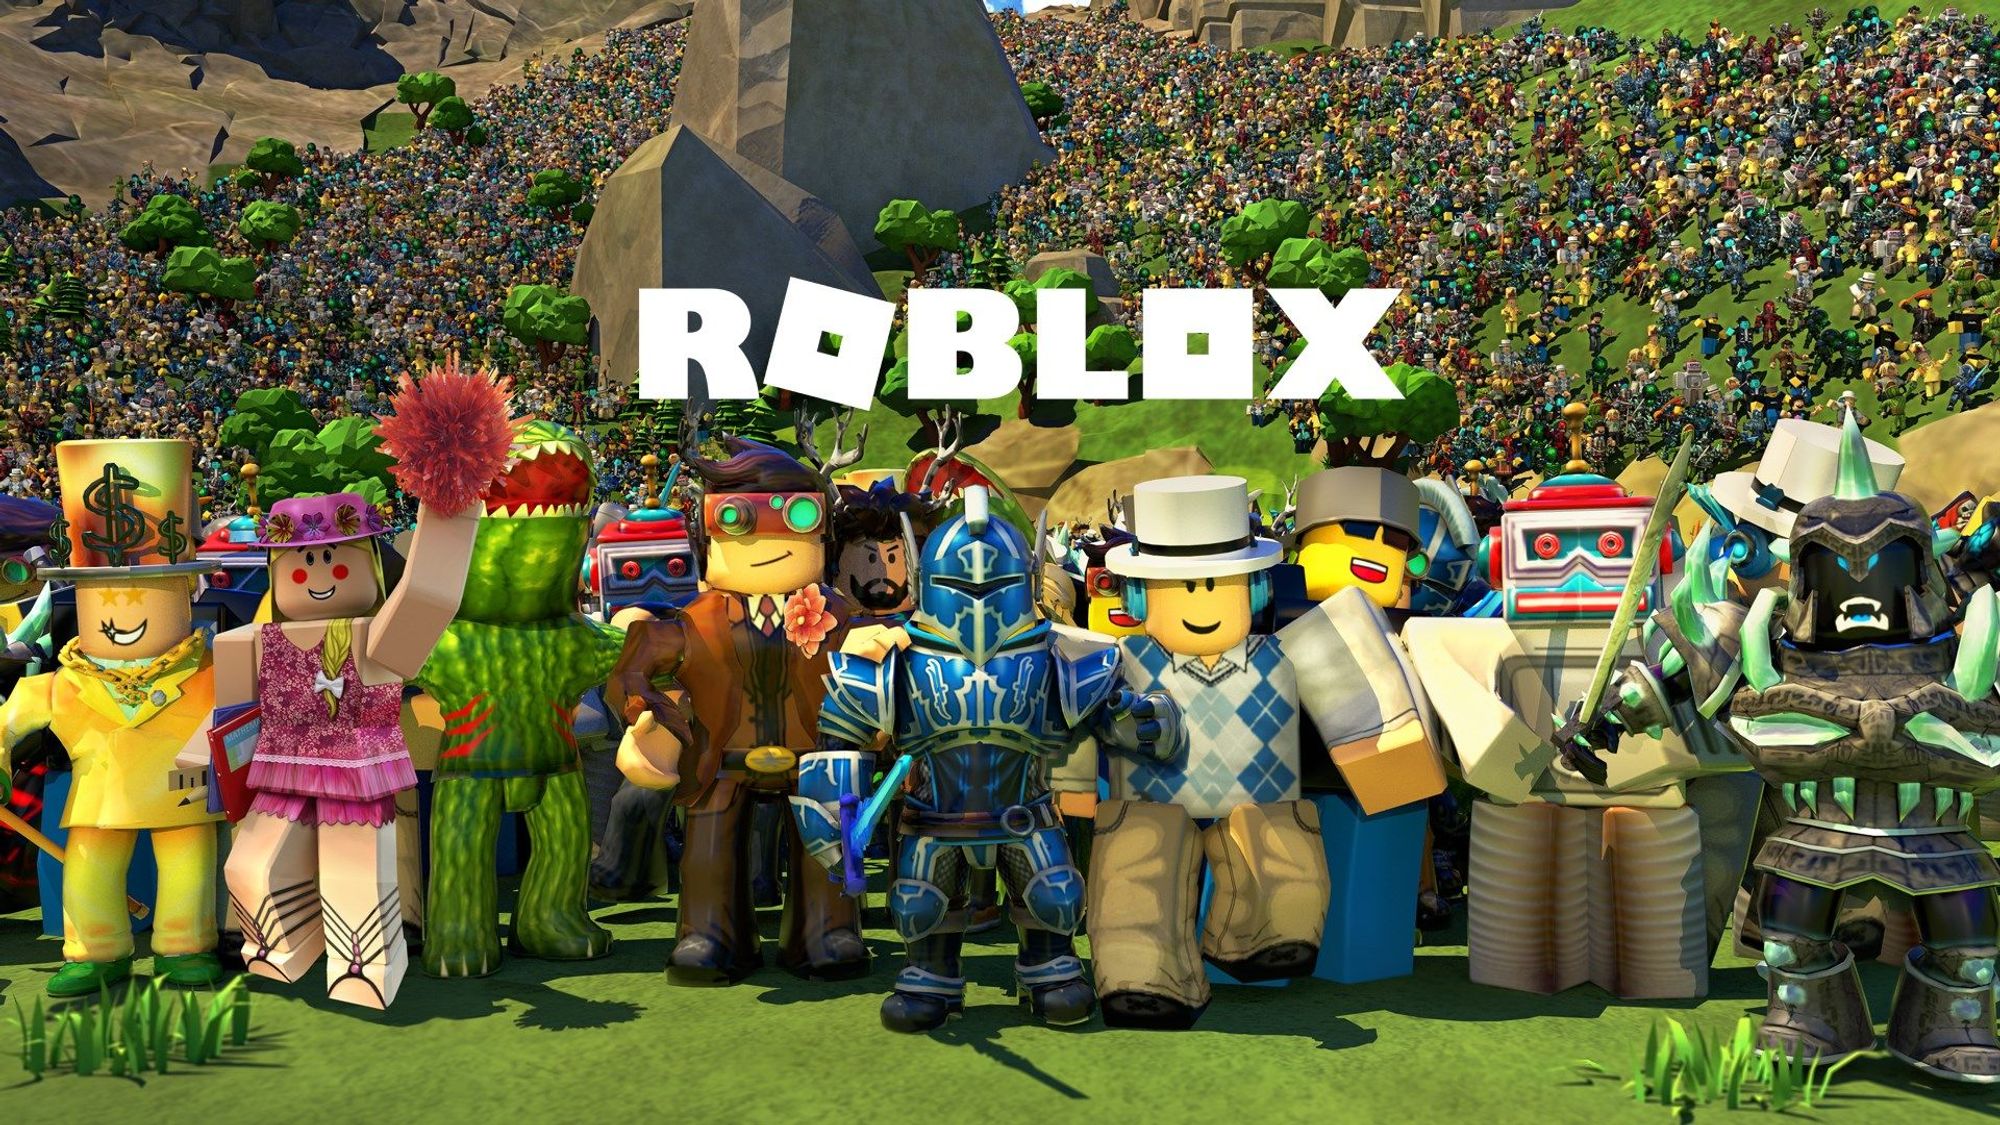 Real Robux Generator 2020 Roblox Hack V1 In 5 Minutes - free robux generator roblox game roblox idea generator